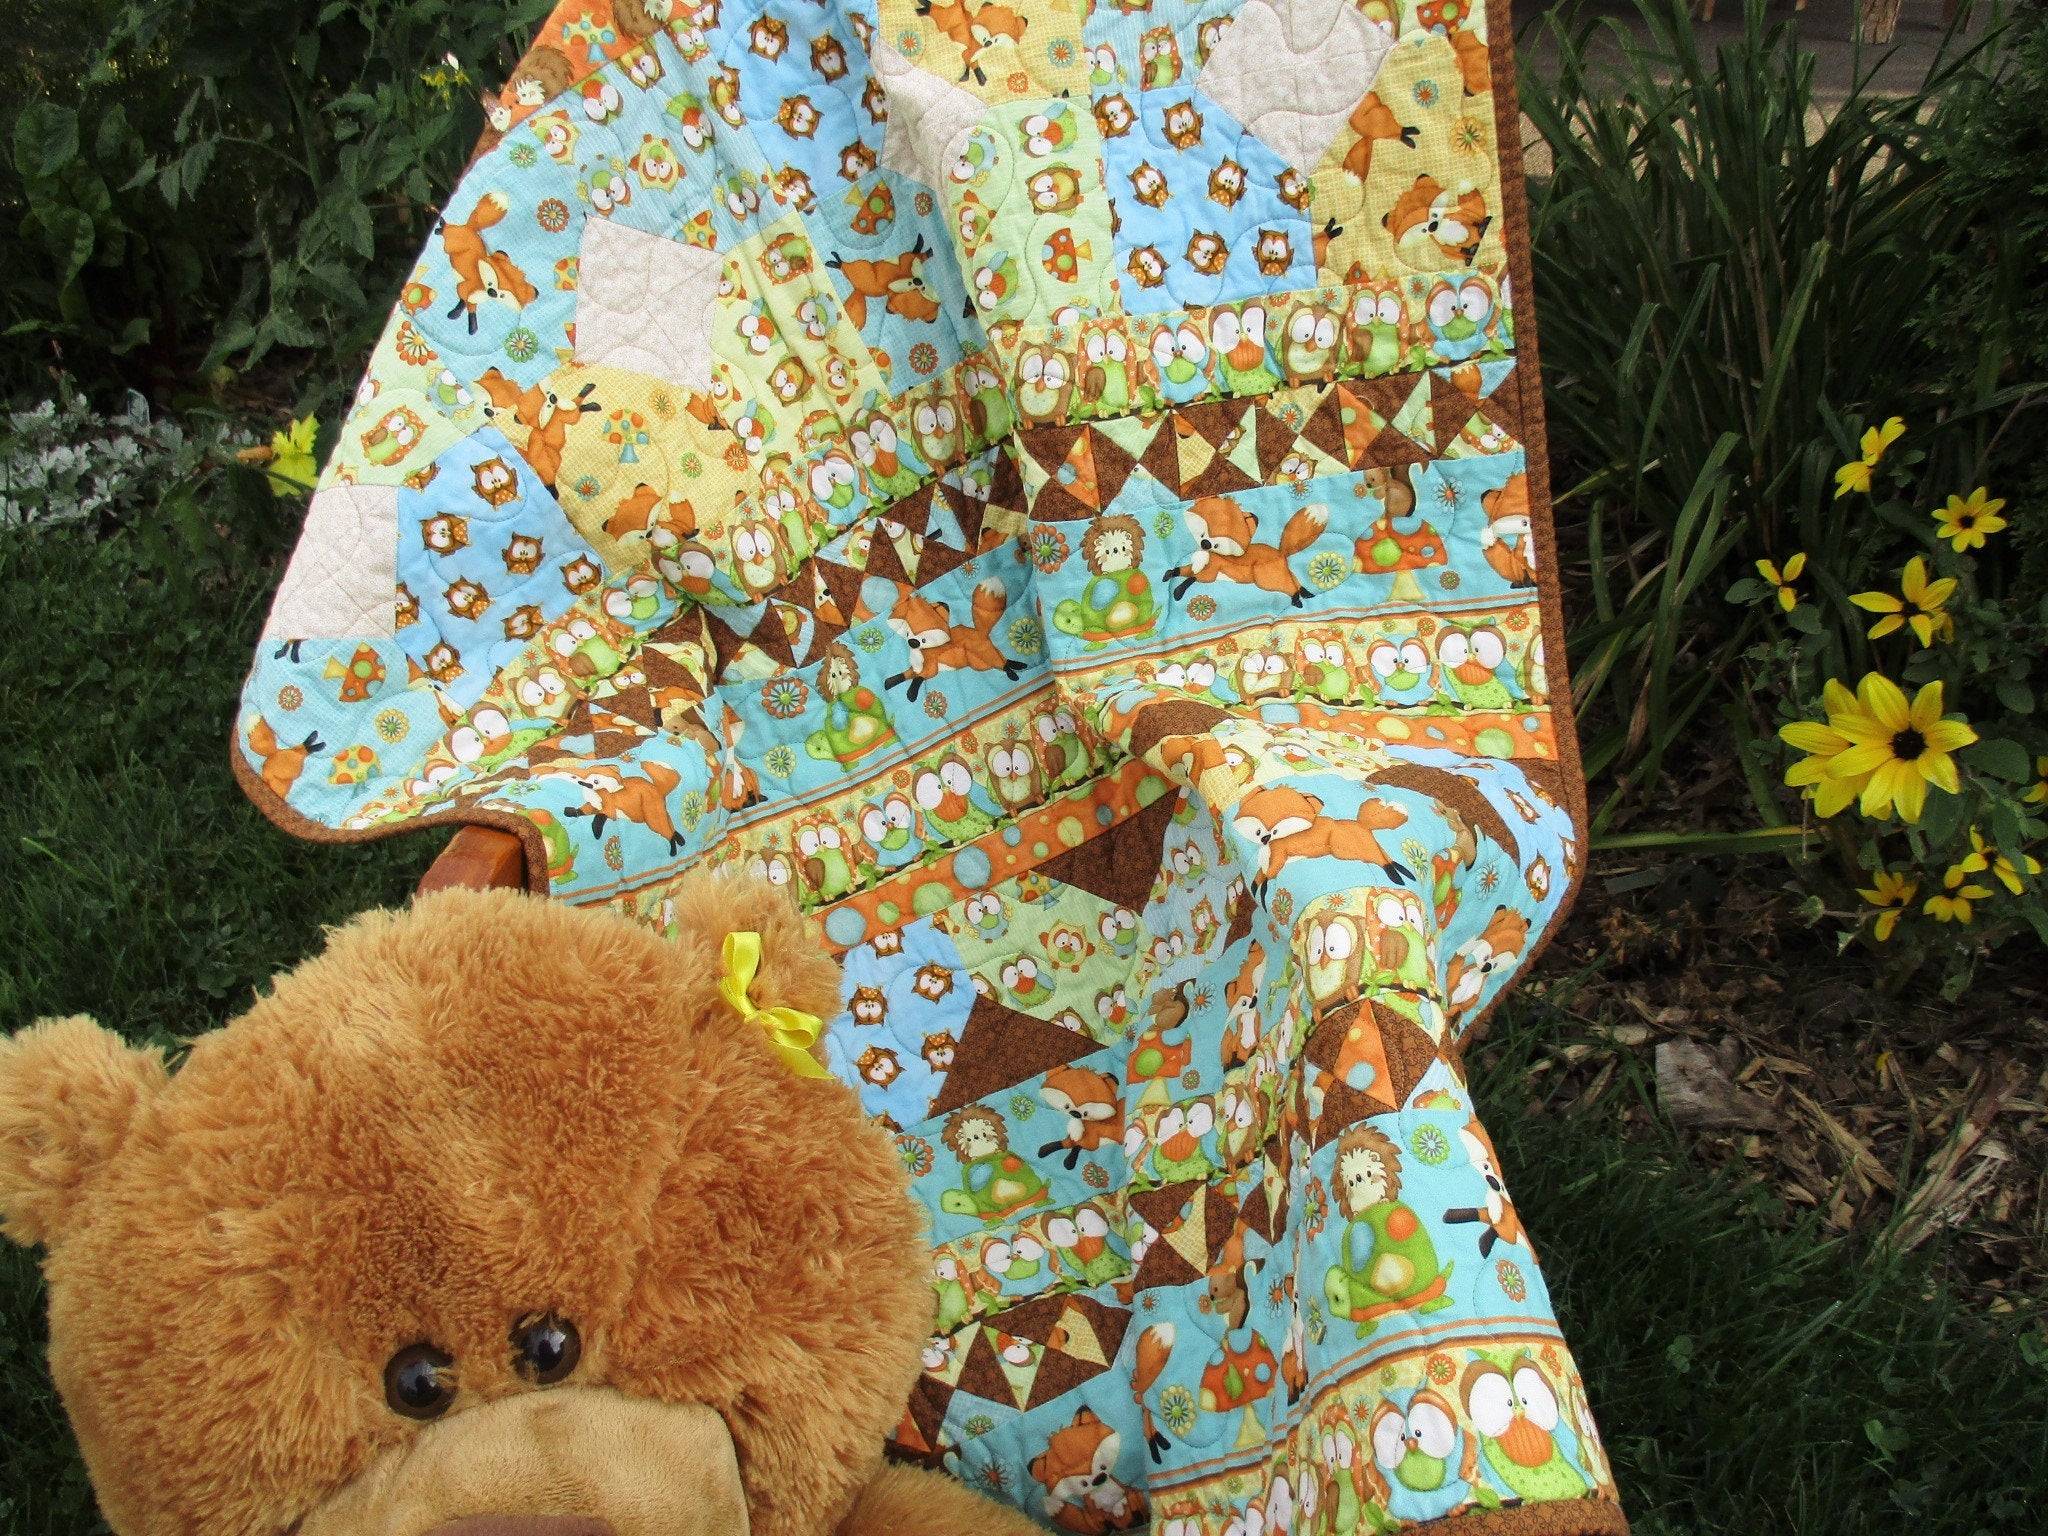 This improv, scrappy baby quilt features little animals and gender neutral colors in blue, green, orange, brown, yellow.